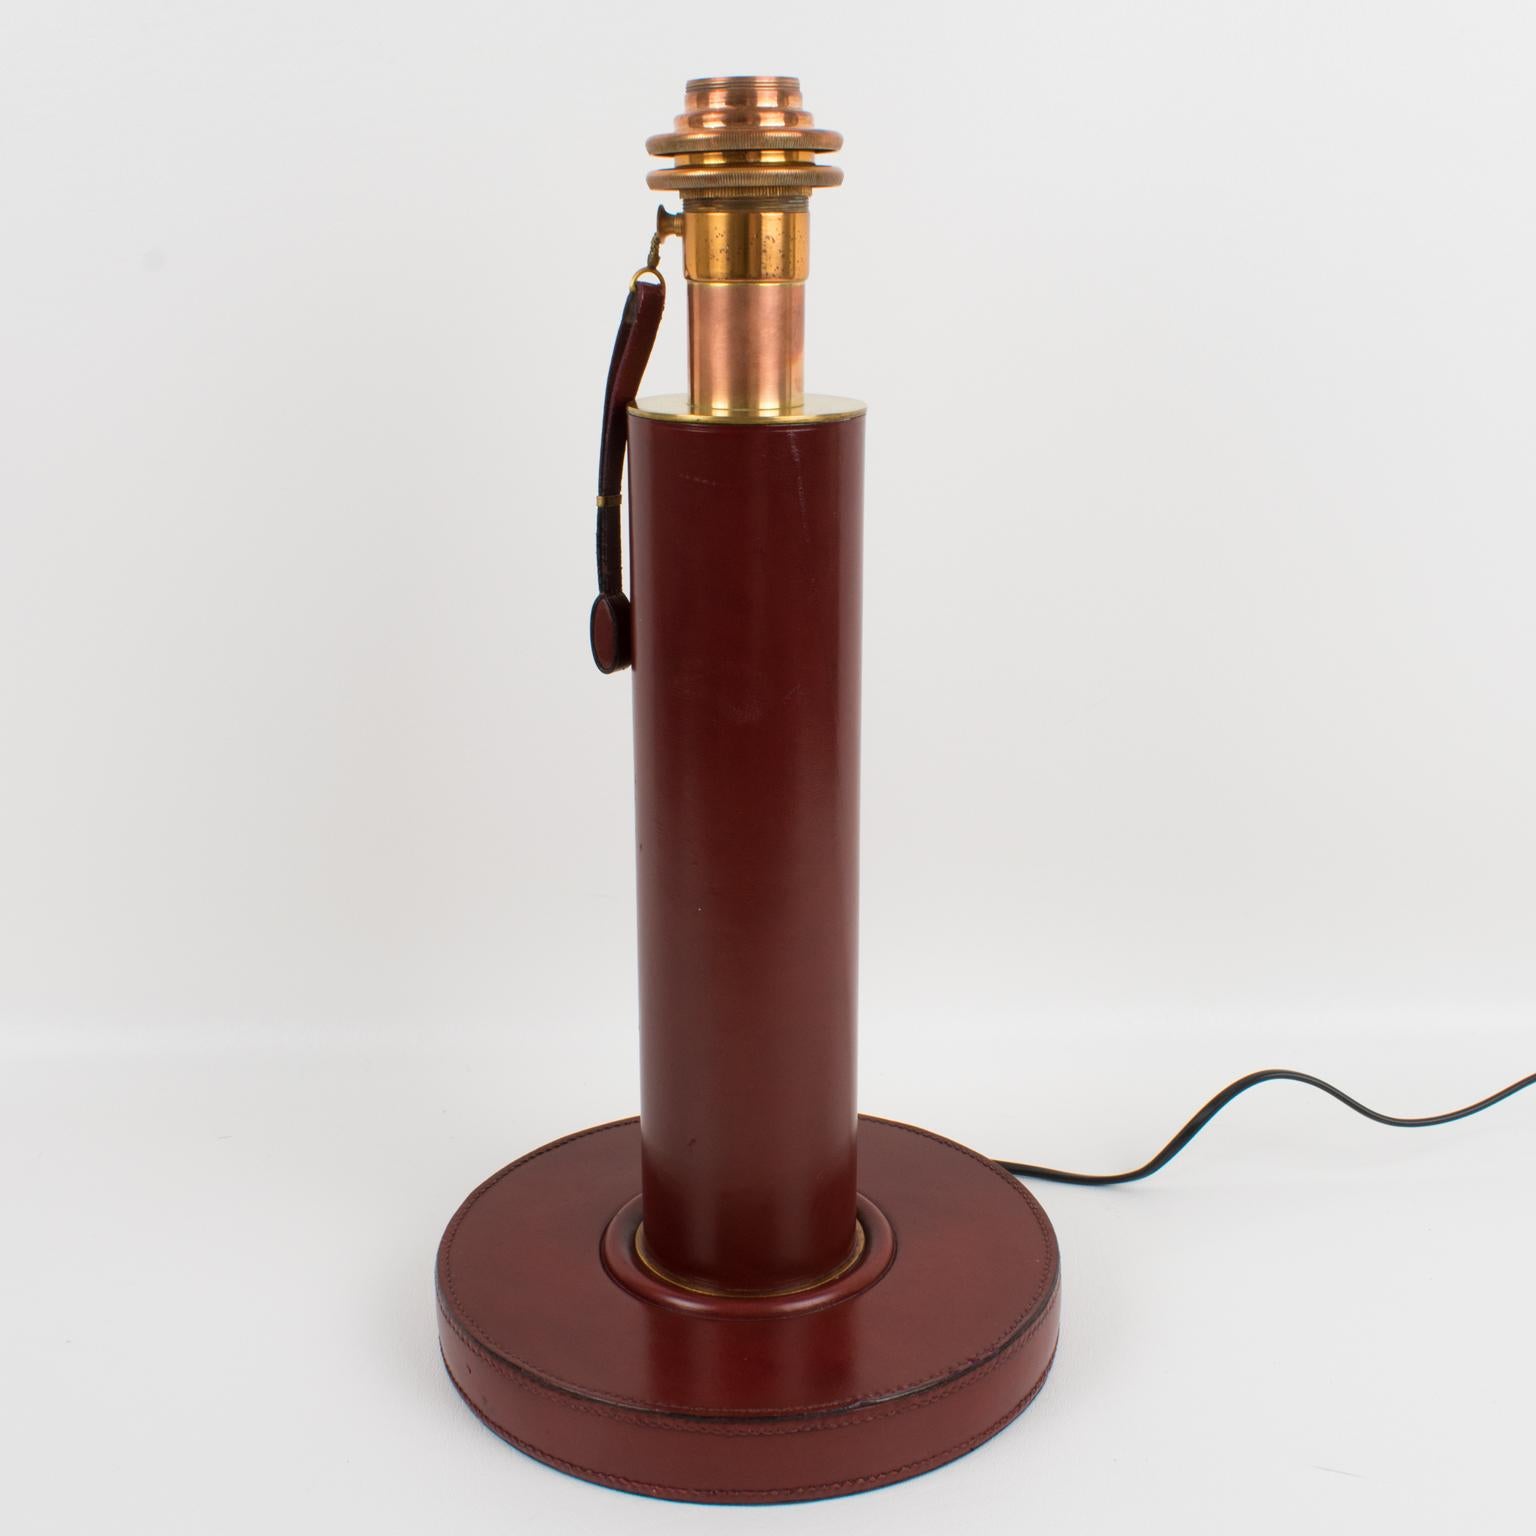 Paul Dupre Lafon 1950s French Art Deco Hand-Stitched Red Leather Table Lamp 2